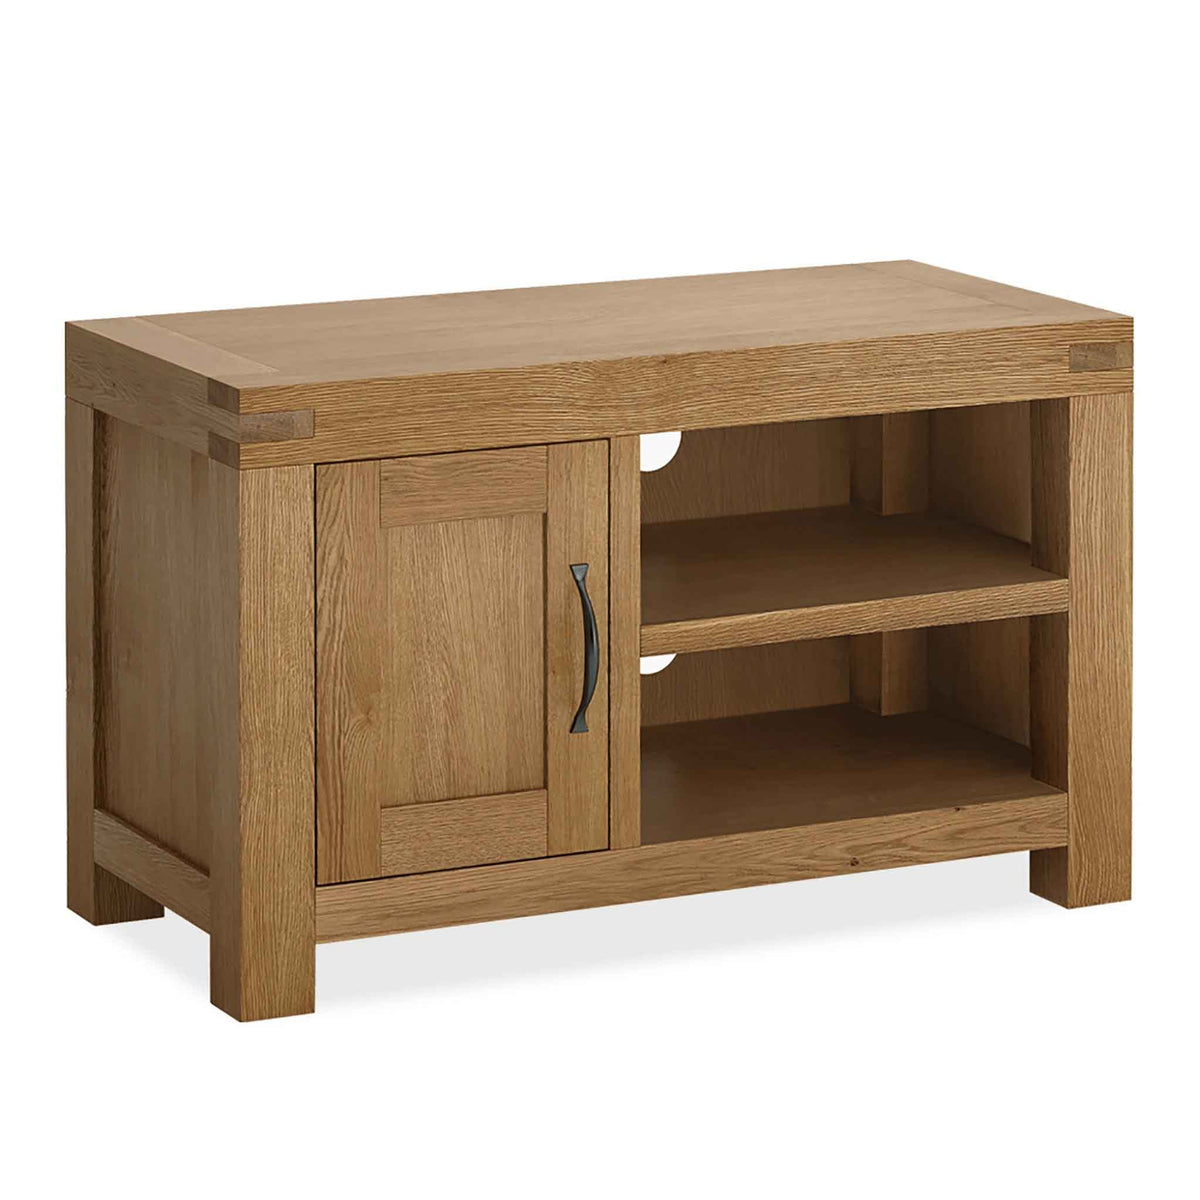 The Abbey Grande 90cm Oak Small TV Stand Storage Unit from Roseland Furniture